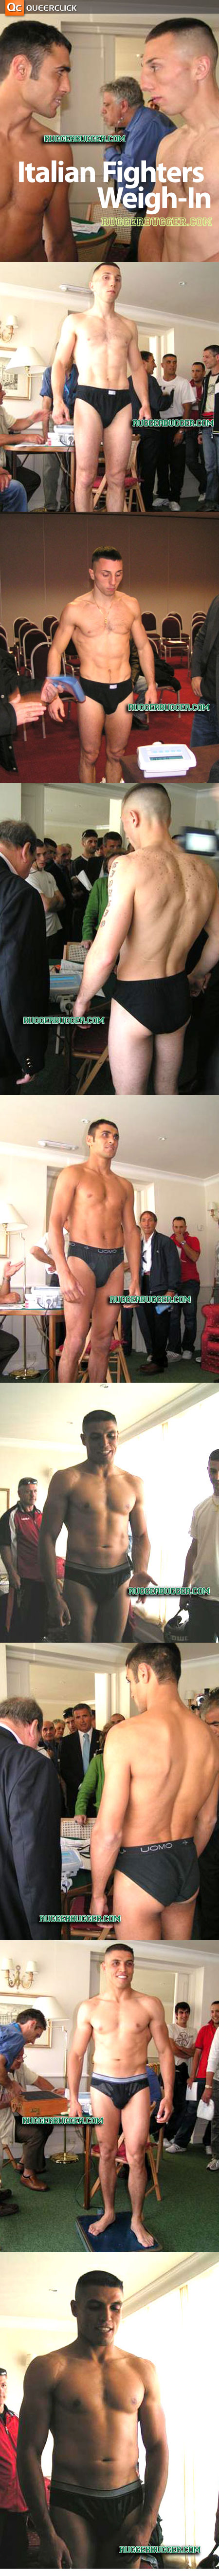 Italian Fighters Weigh-In at RuggerBugger.com